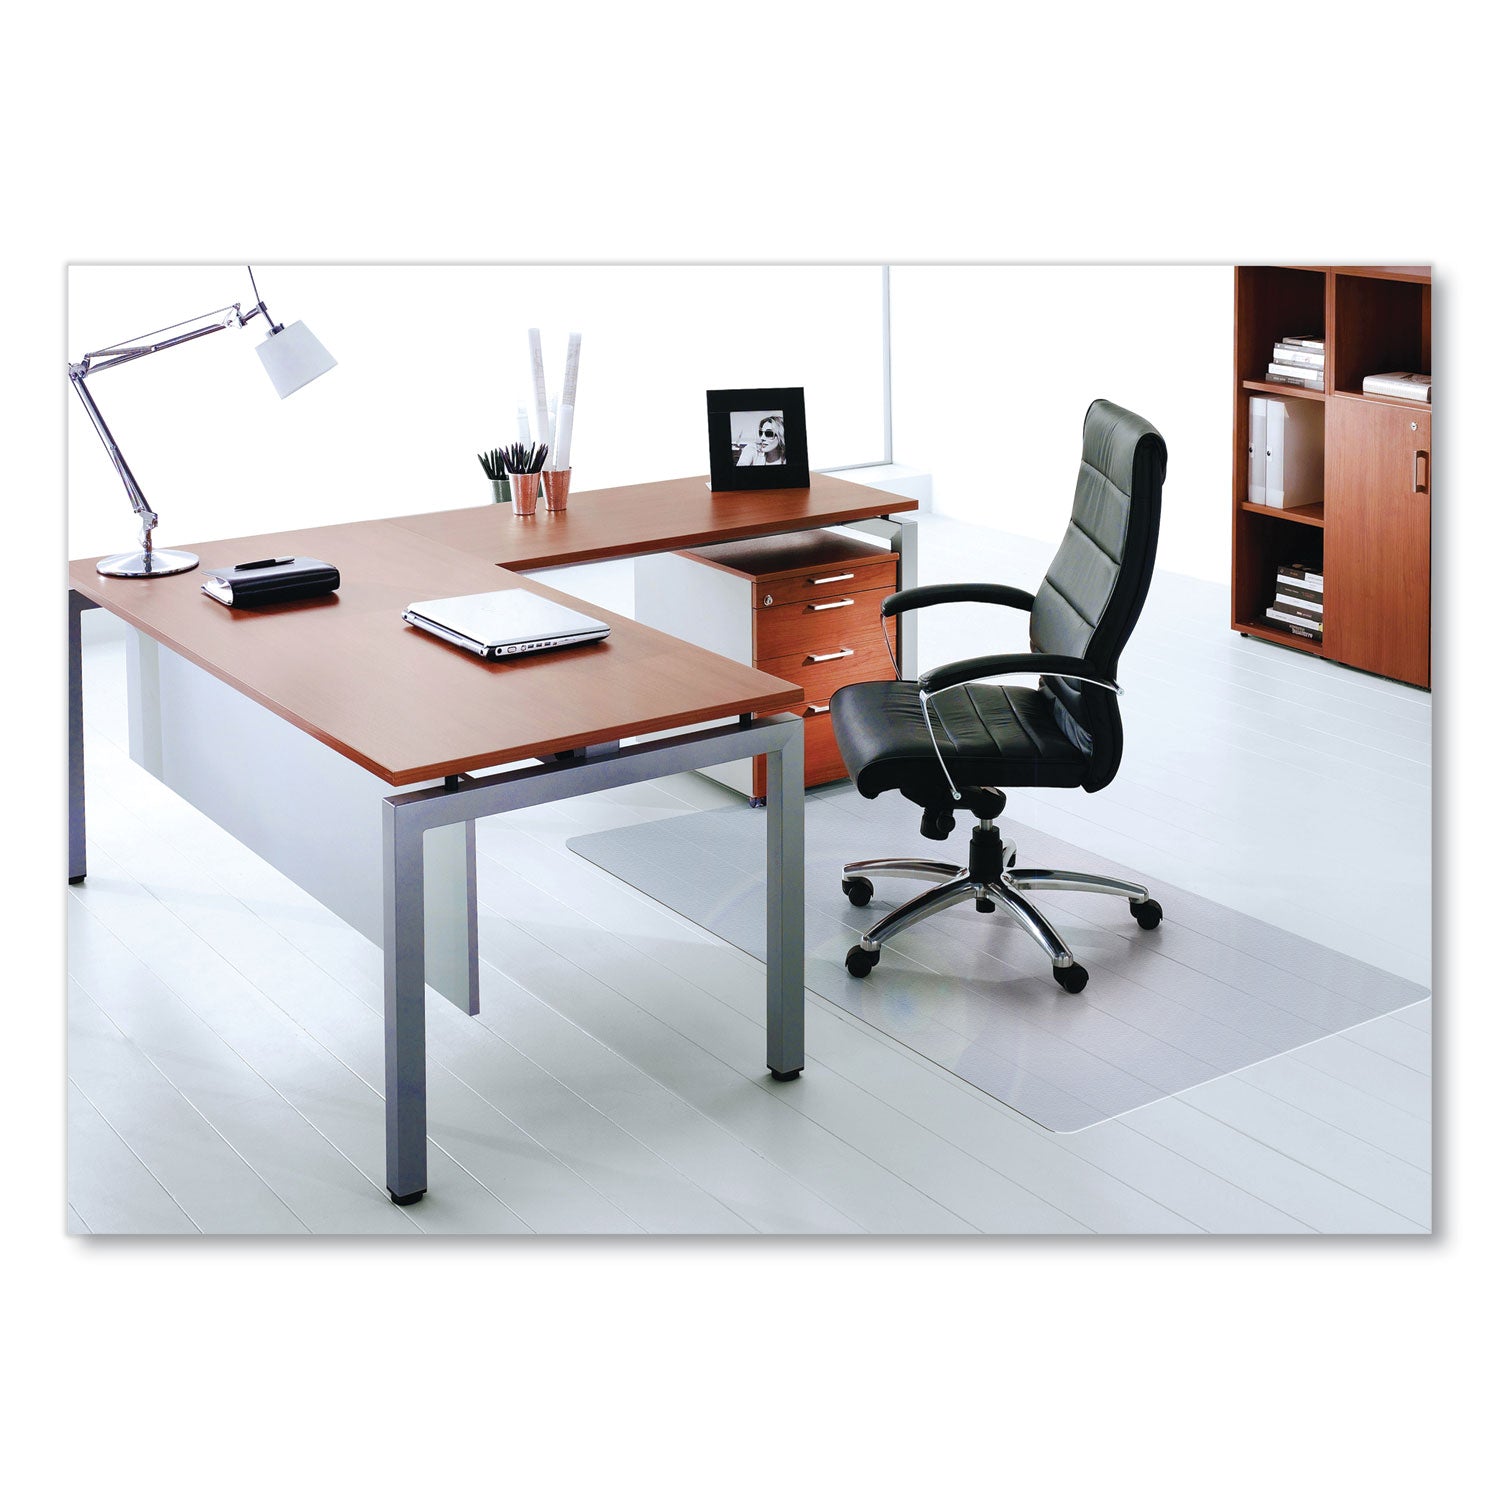 cleartex-ultimat-polycarbonate-chair-mat-for-hard-floors-48-x-53-clear_flrer1213419er - 1